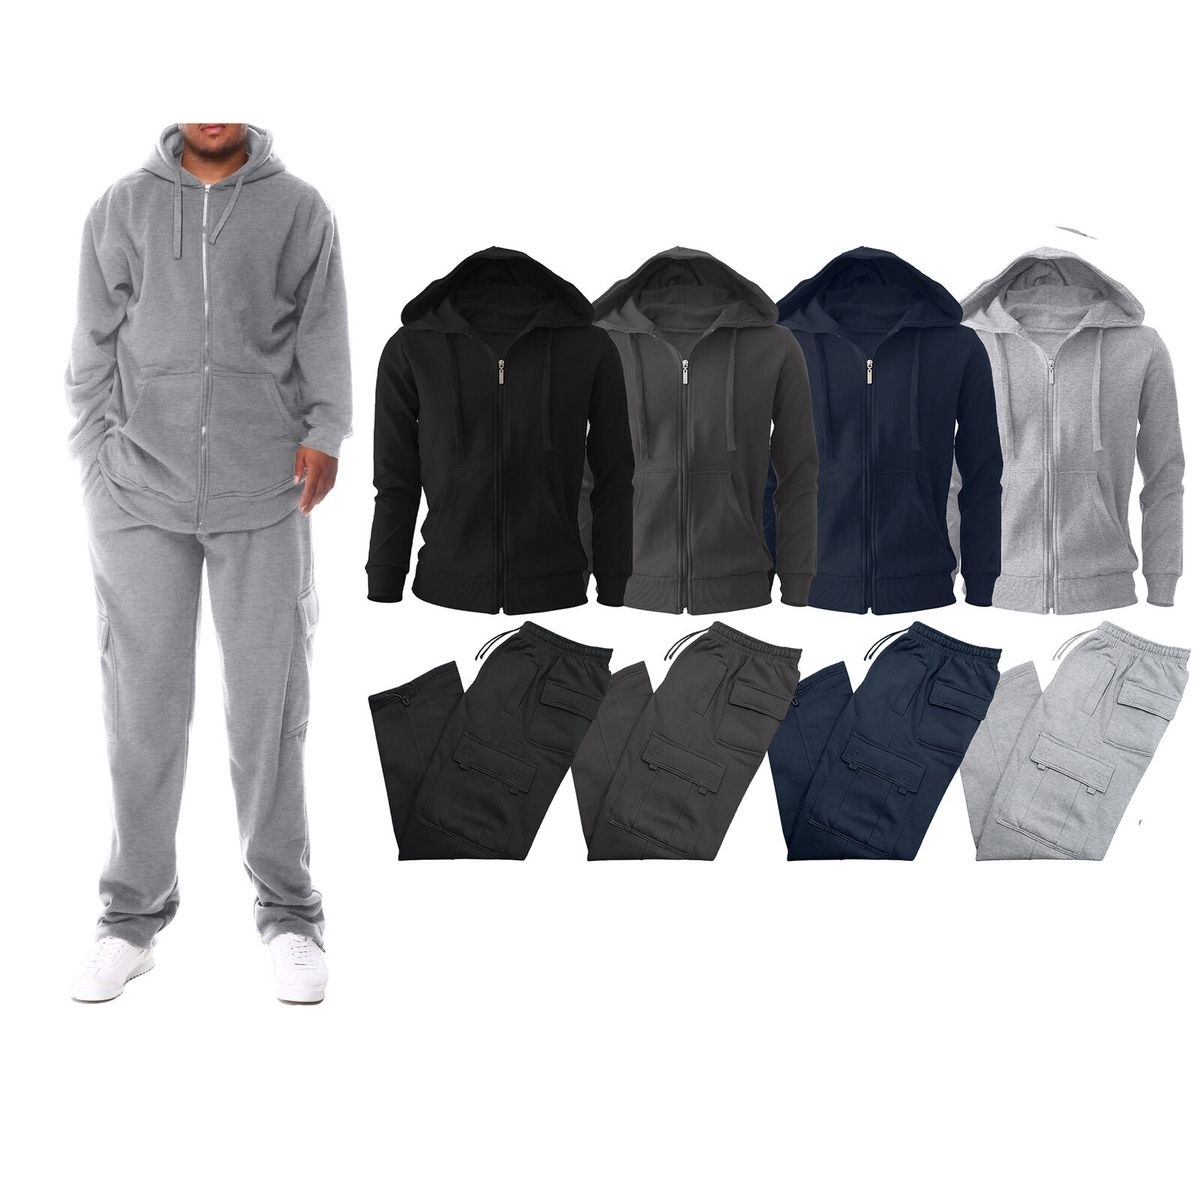 2-Pack: Men's Big & Tall Winter Warm Athletic Active Cozy Fleece Lined Multi-Pocket Full Zip Up Cargo Tracksuit - Charcoal, X-large